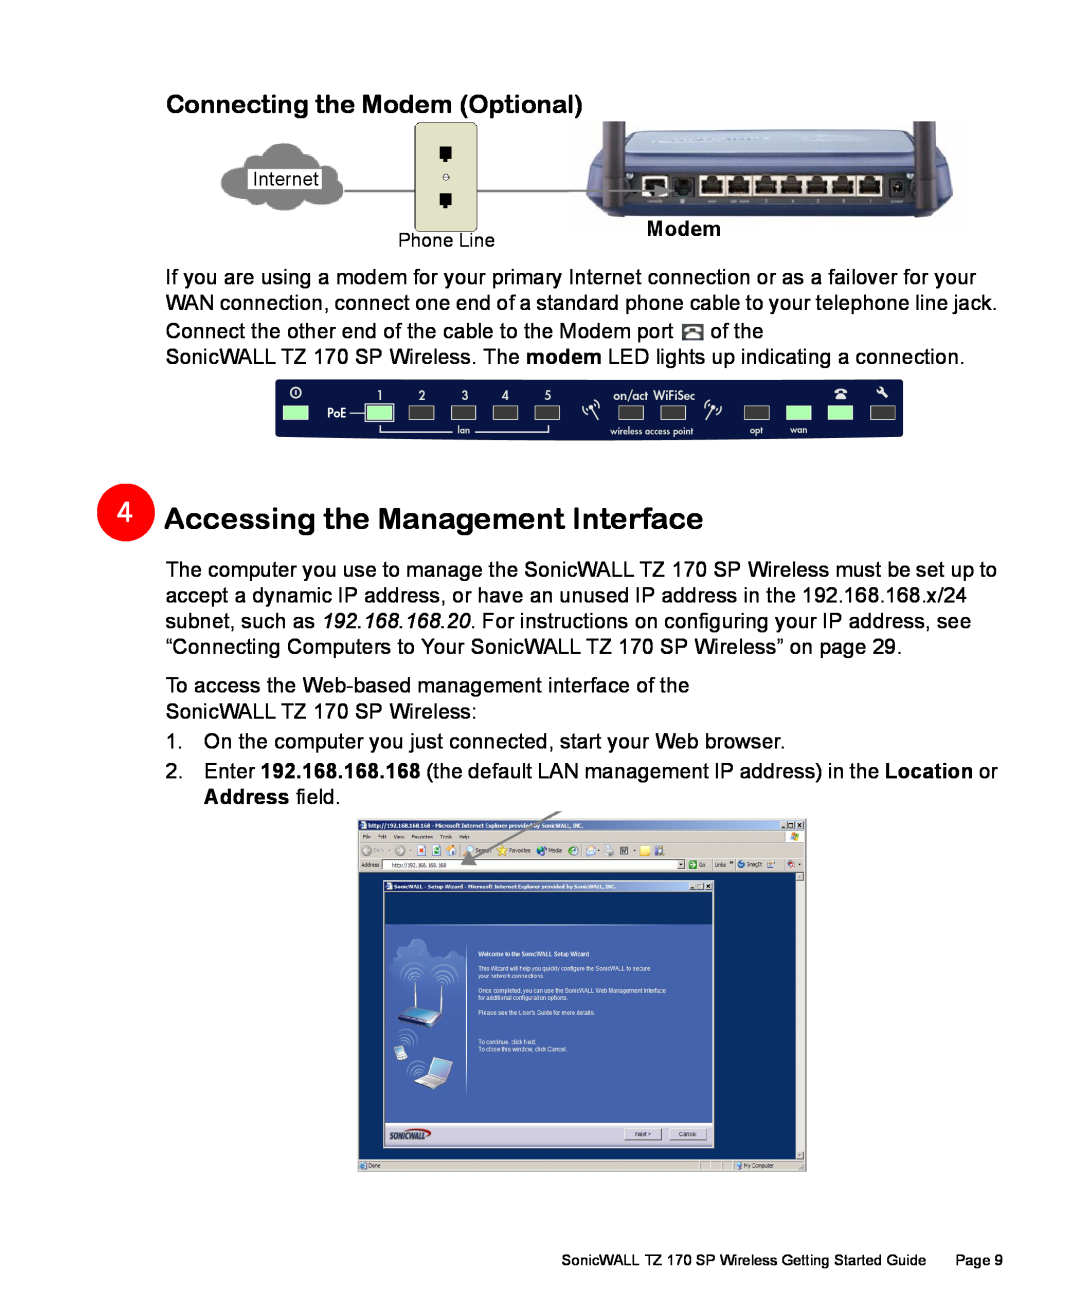 SonicWALL TZ 170 SP manual Accessing the Management Interface, Connecting the Modem Optional 